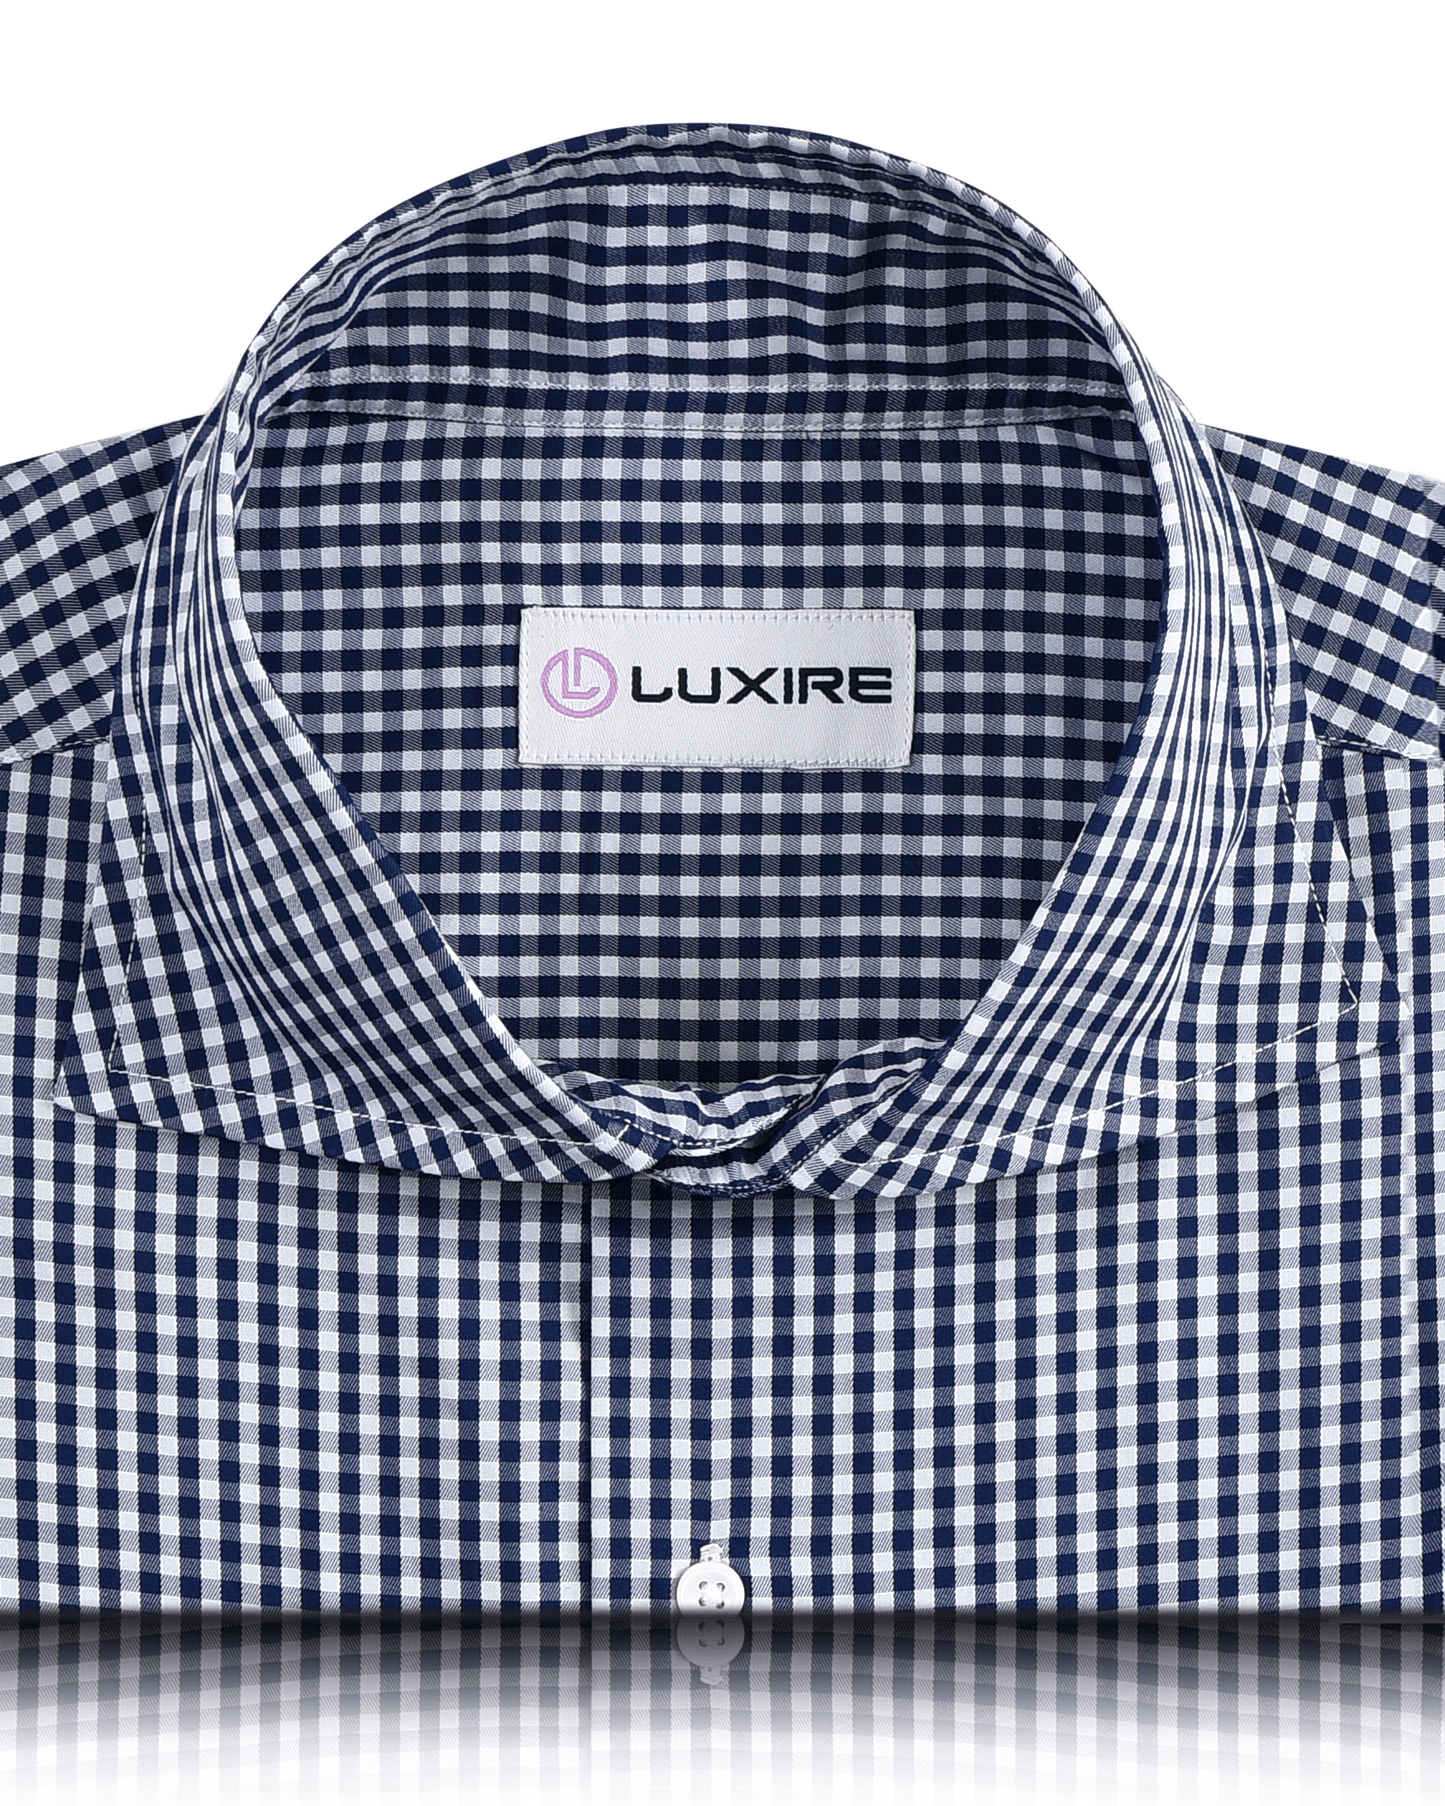 Front close view of custom check shirts for men by Luxire dark denim blue on white